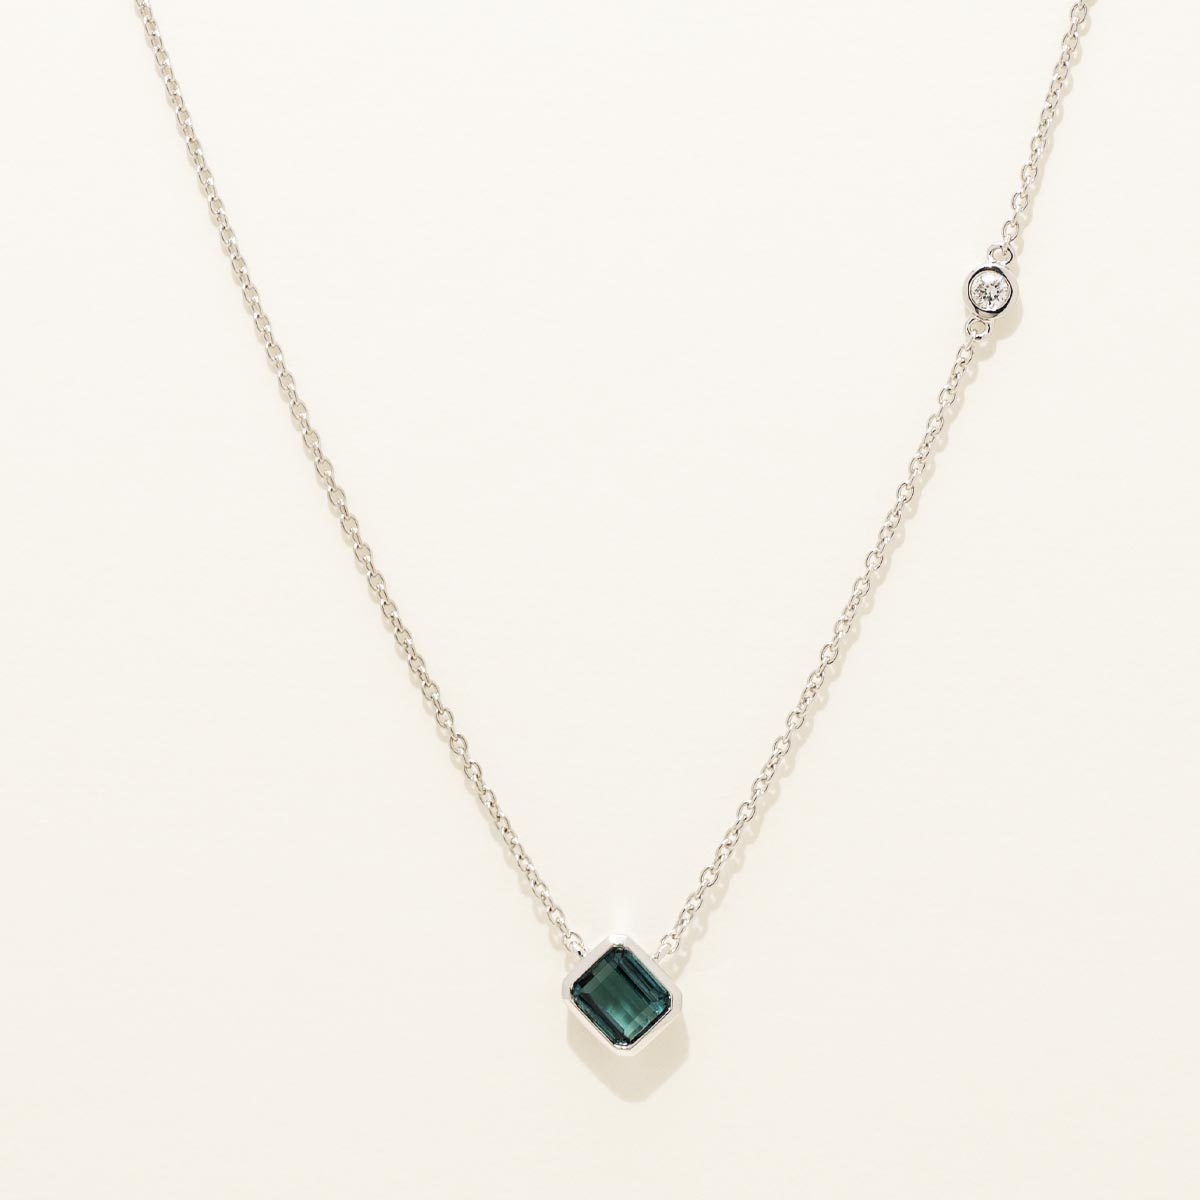 Maine Indicolite Emerald Cut Bezel Necklace in 14kt White Gold with Diamond (.04ct)